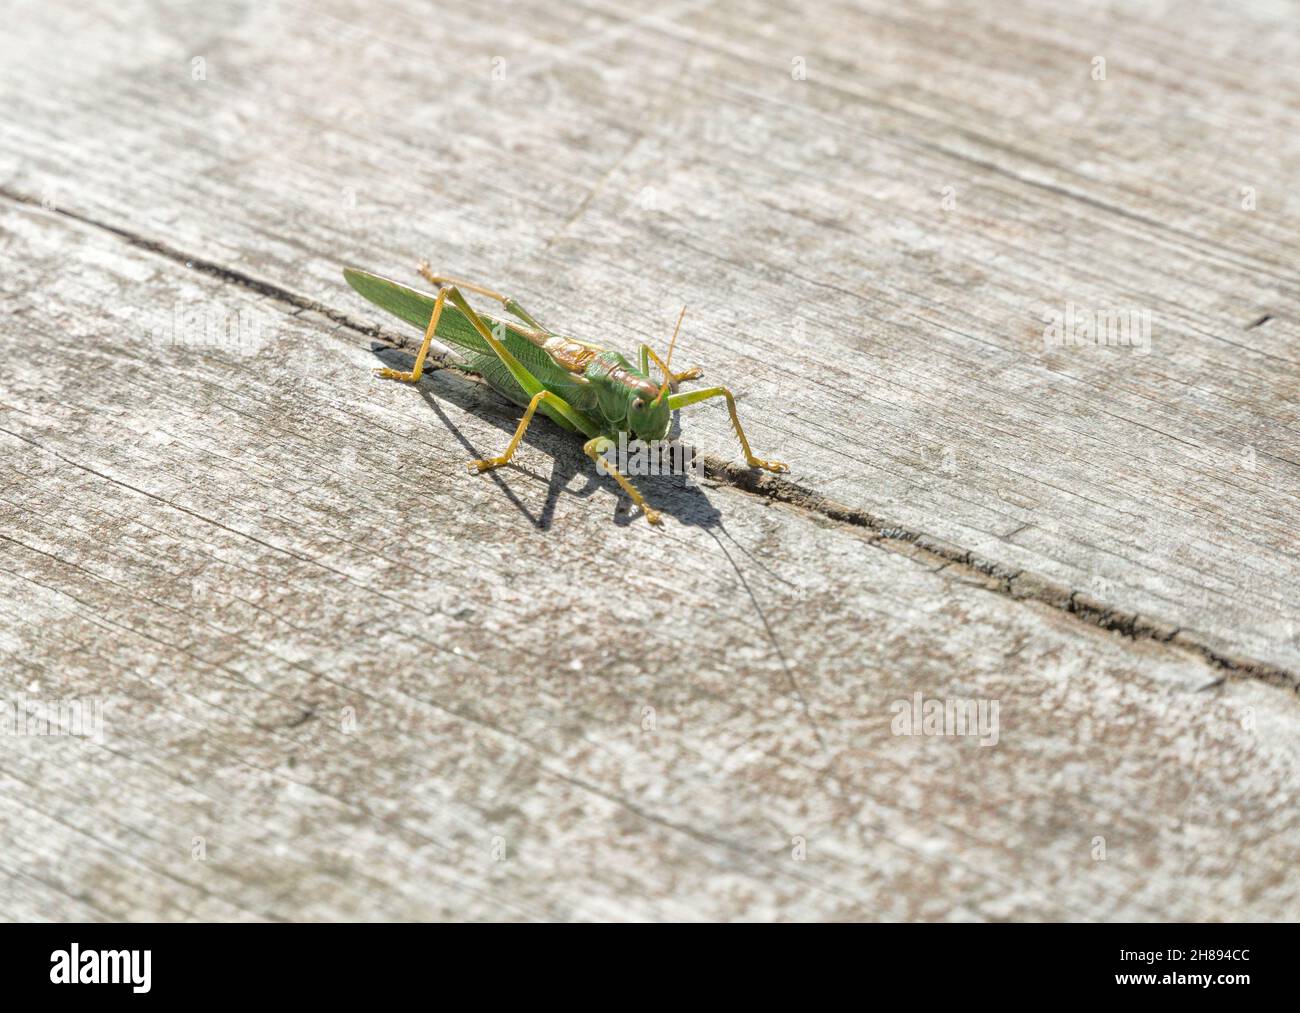 Green grasshopper on a wooden surface closeup. Wildlife. Grasshoppers, katydids - a family of Orthoptera insects. Stock Photo